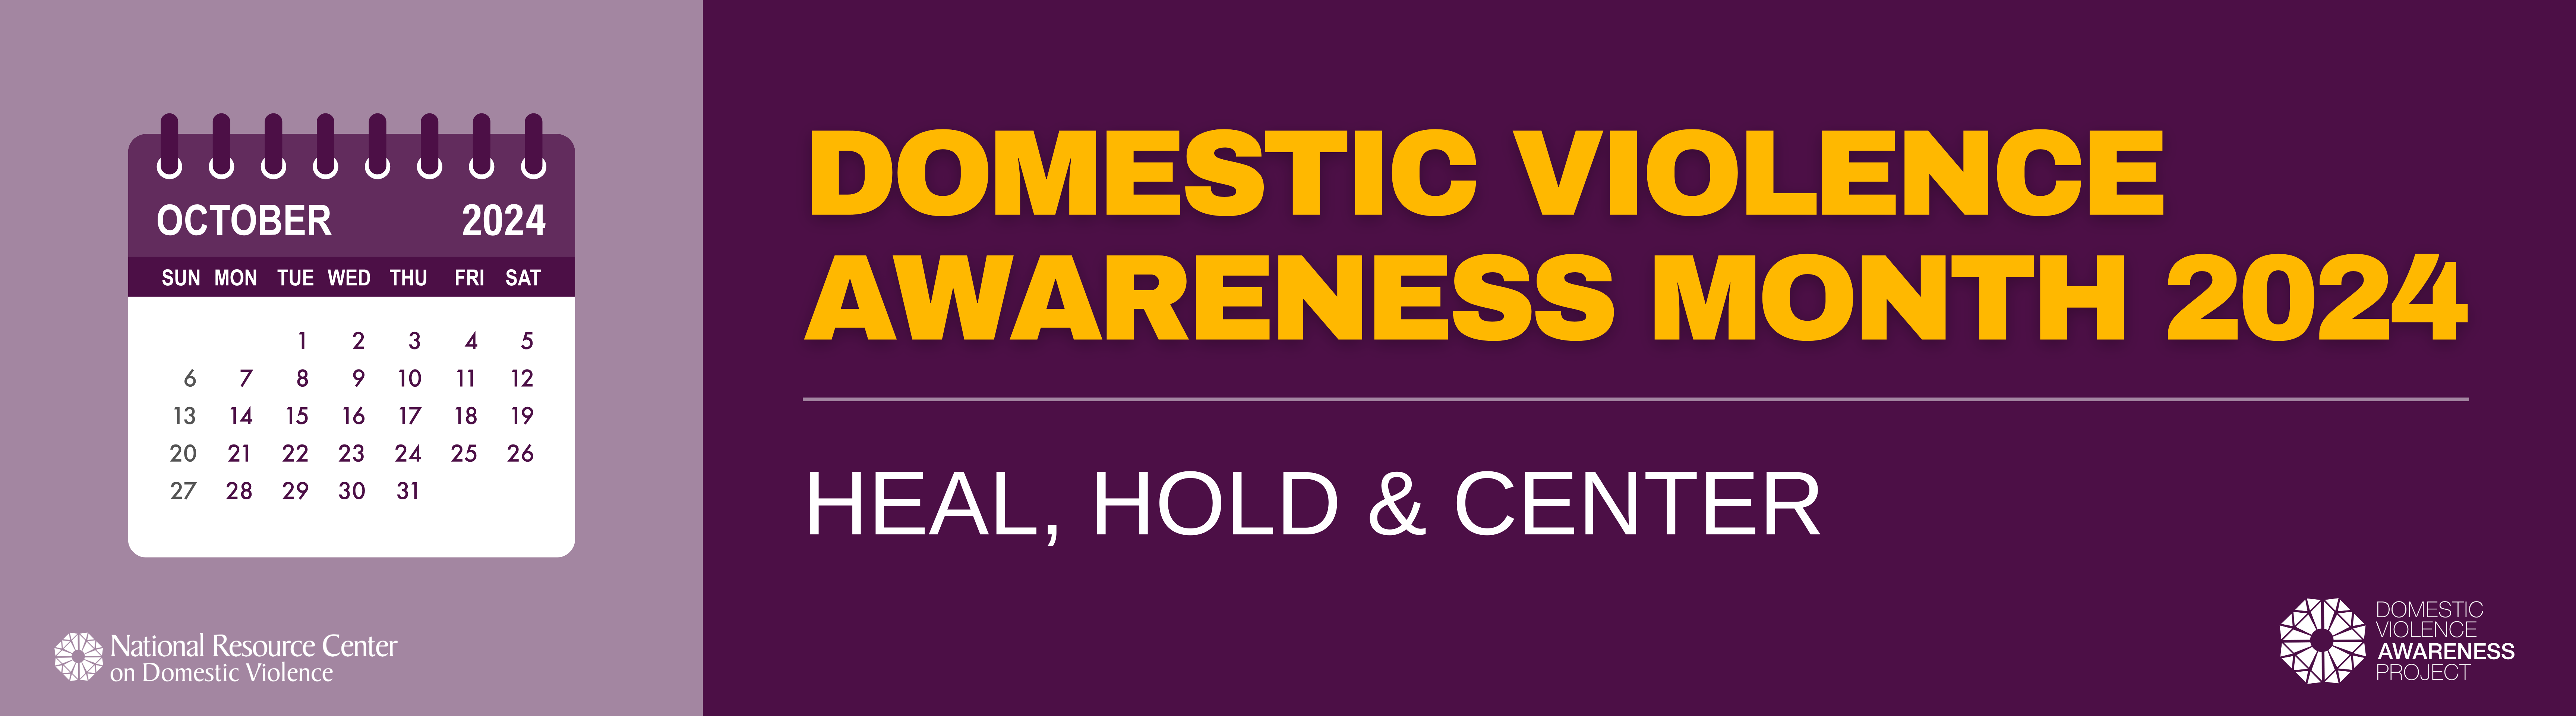 Domestic Violence Awareness Month: Heal, Hold & Center